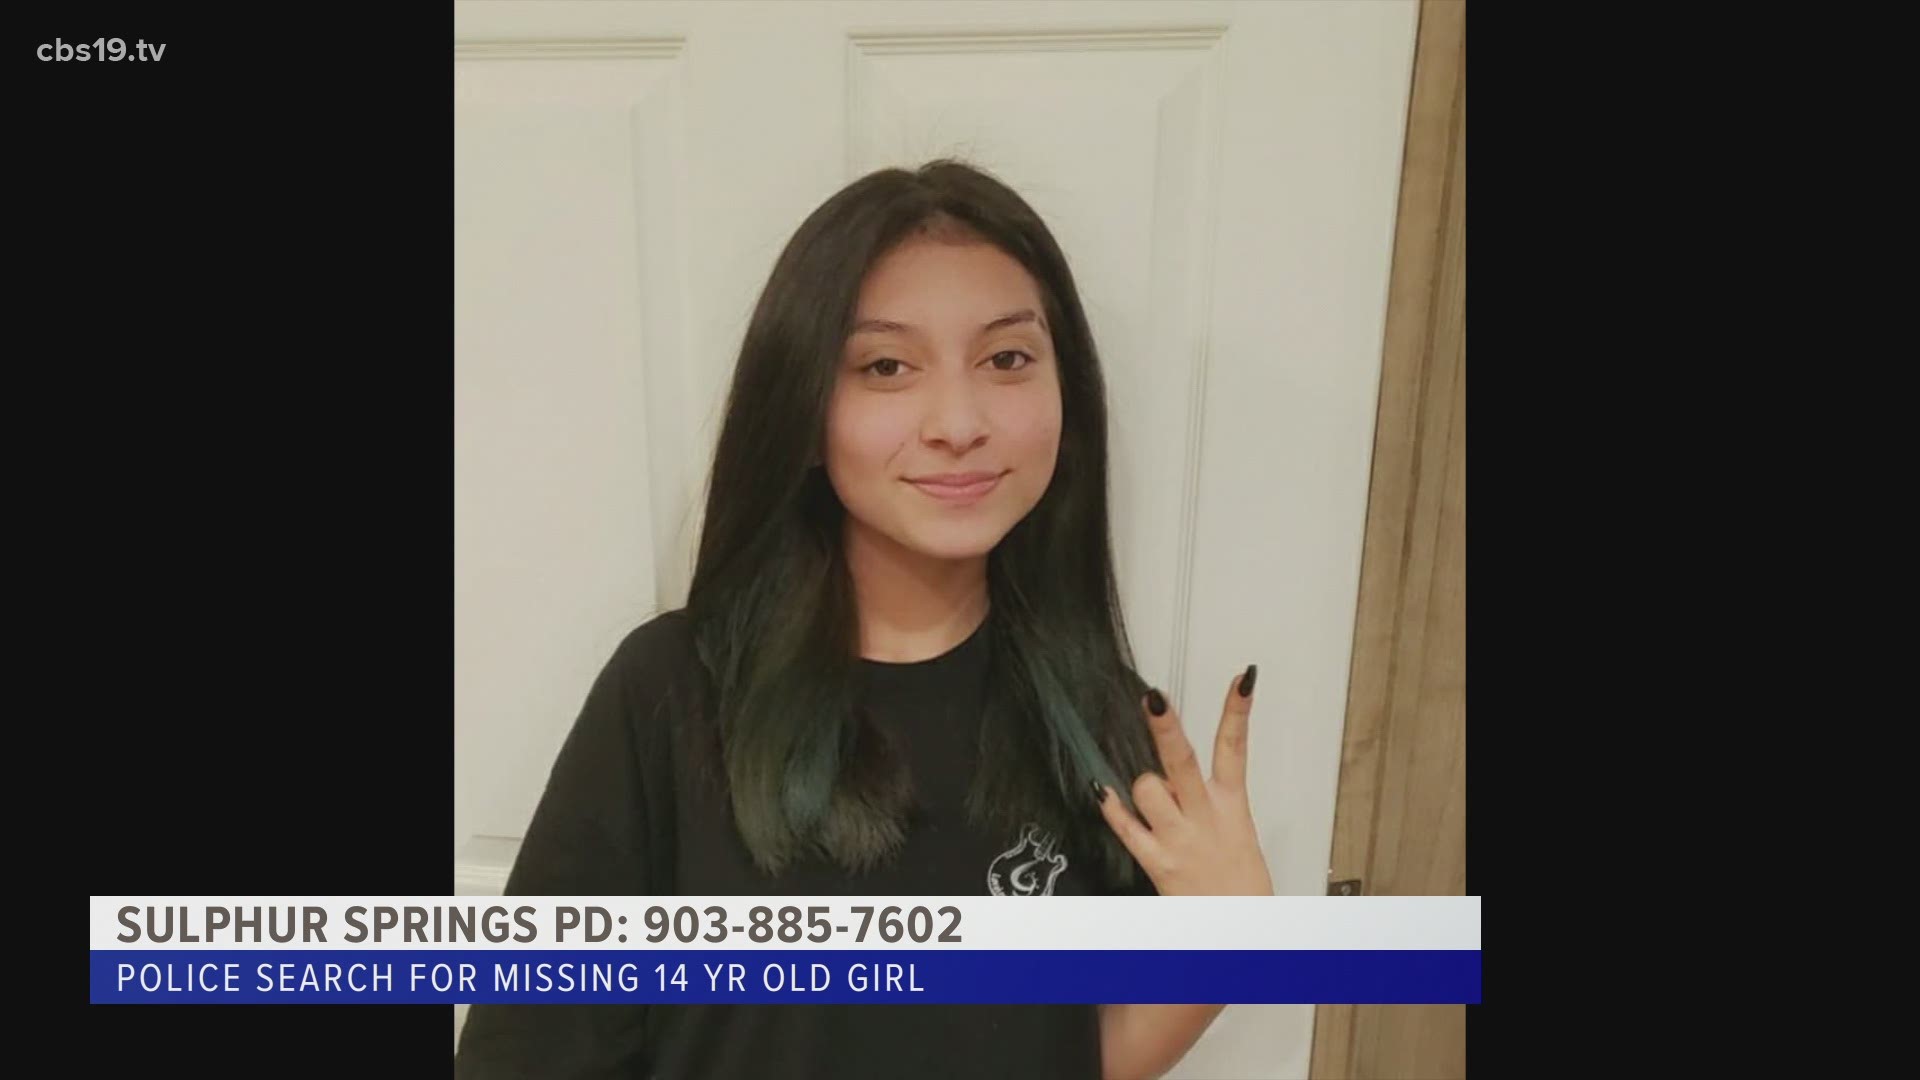 Police are currently searching for 14-year-old Kaitlyn Olguin. She is 4’10” weighing 110 lbs with brown eyes and black hair.